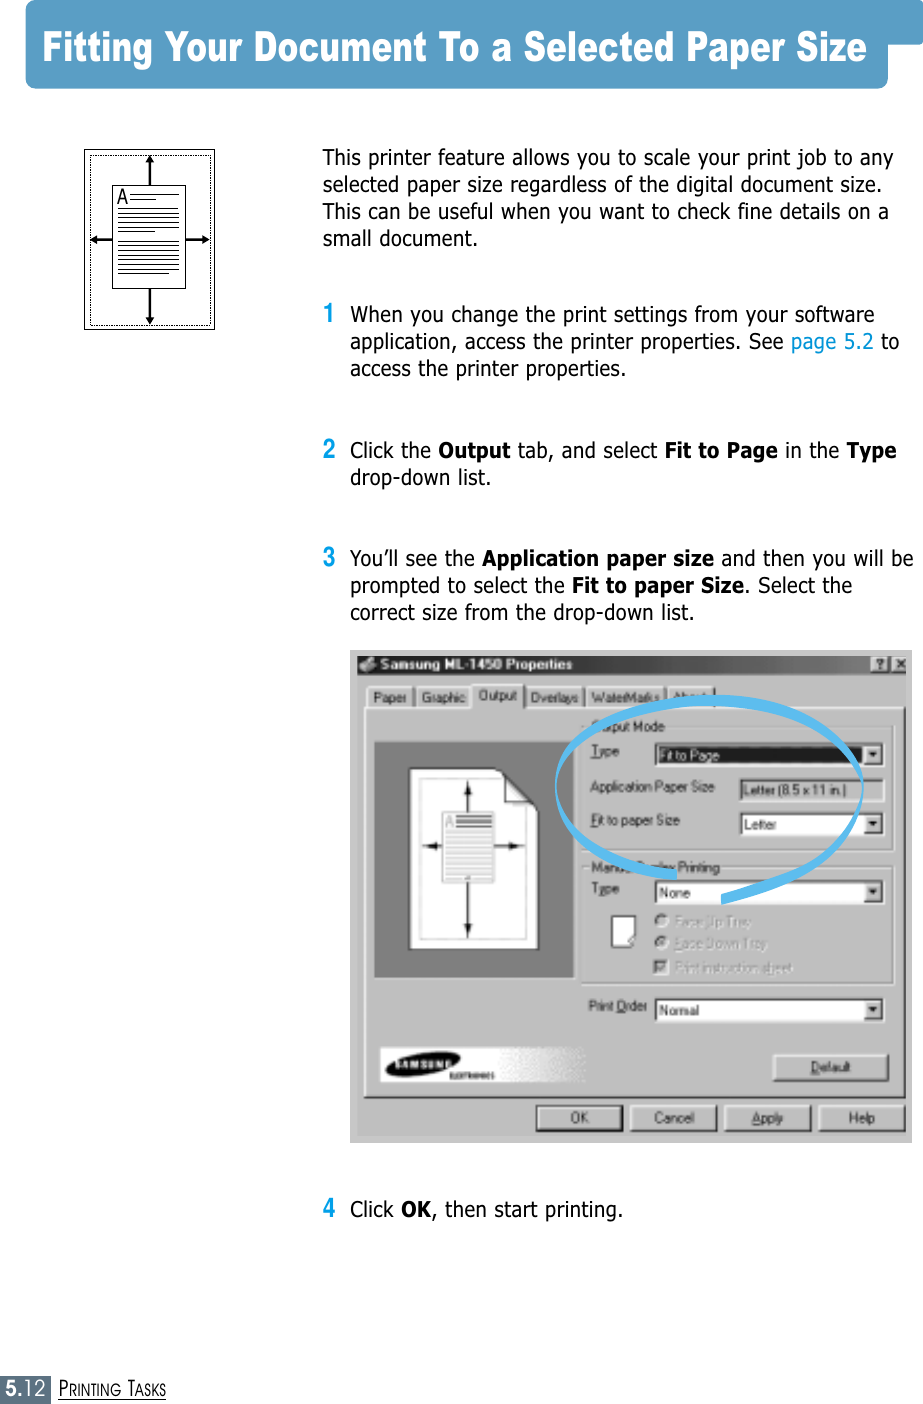 5.12PRINTING TASKSFitting Your Document To a Selected Paper Size This printer feature allows you to scale your print job to anyselected paper size regardless of the digital document size.This can be useful when you want to check fine details on asmall document. 1When you change the print settings from your softwareapplication, access the printer properties. See page 5.2 toaccess the printer properties.2Click the Output tab, and select Fit to Page in the Typedrop-down list. 3You’ll see the Application paper size and then you will beprompted to select the Fit to paper Size. Select thecorrect size from the drop-down list.4Click OK, then start printing.A